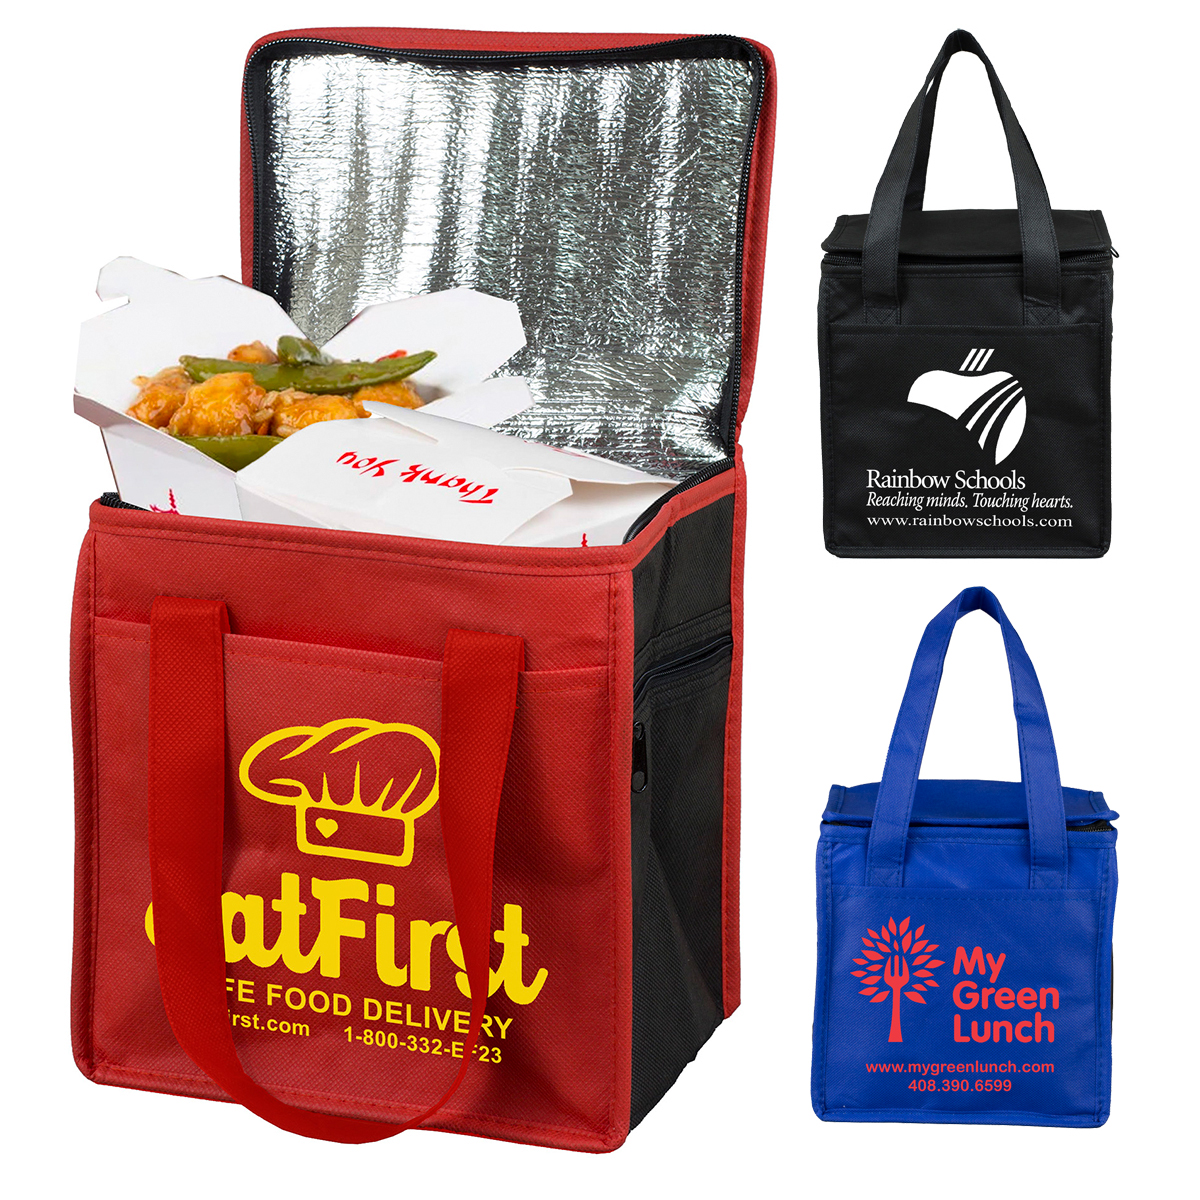 8” W x 8-1/2” H “Super Frosty” Insulated Cooler Lunch Tote Bag 